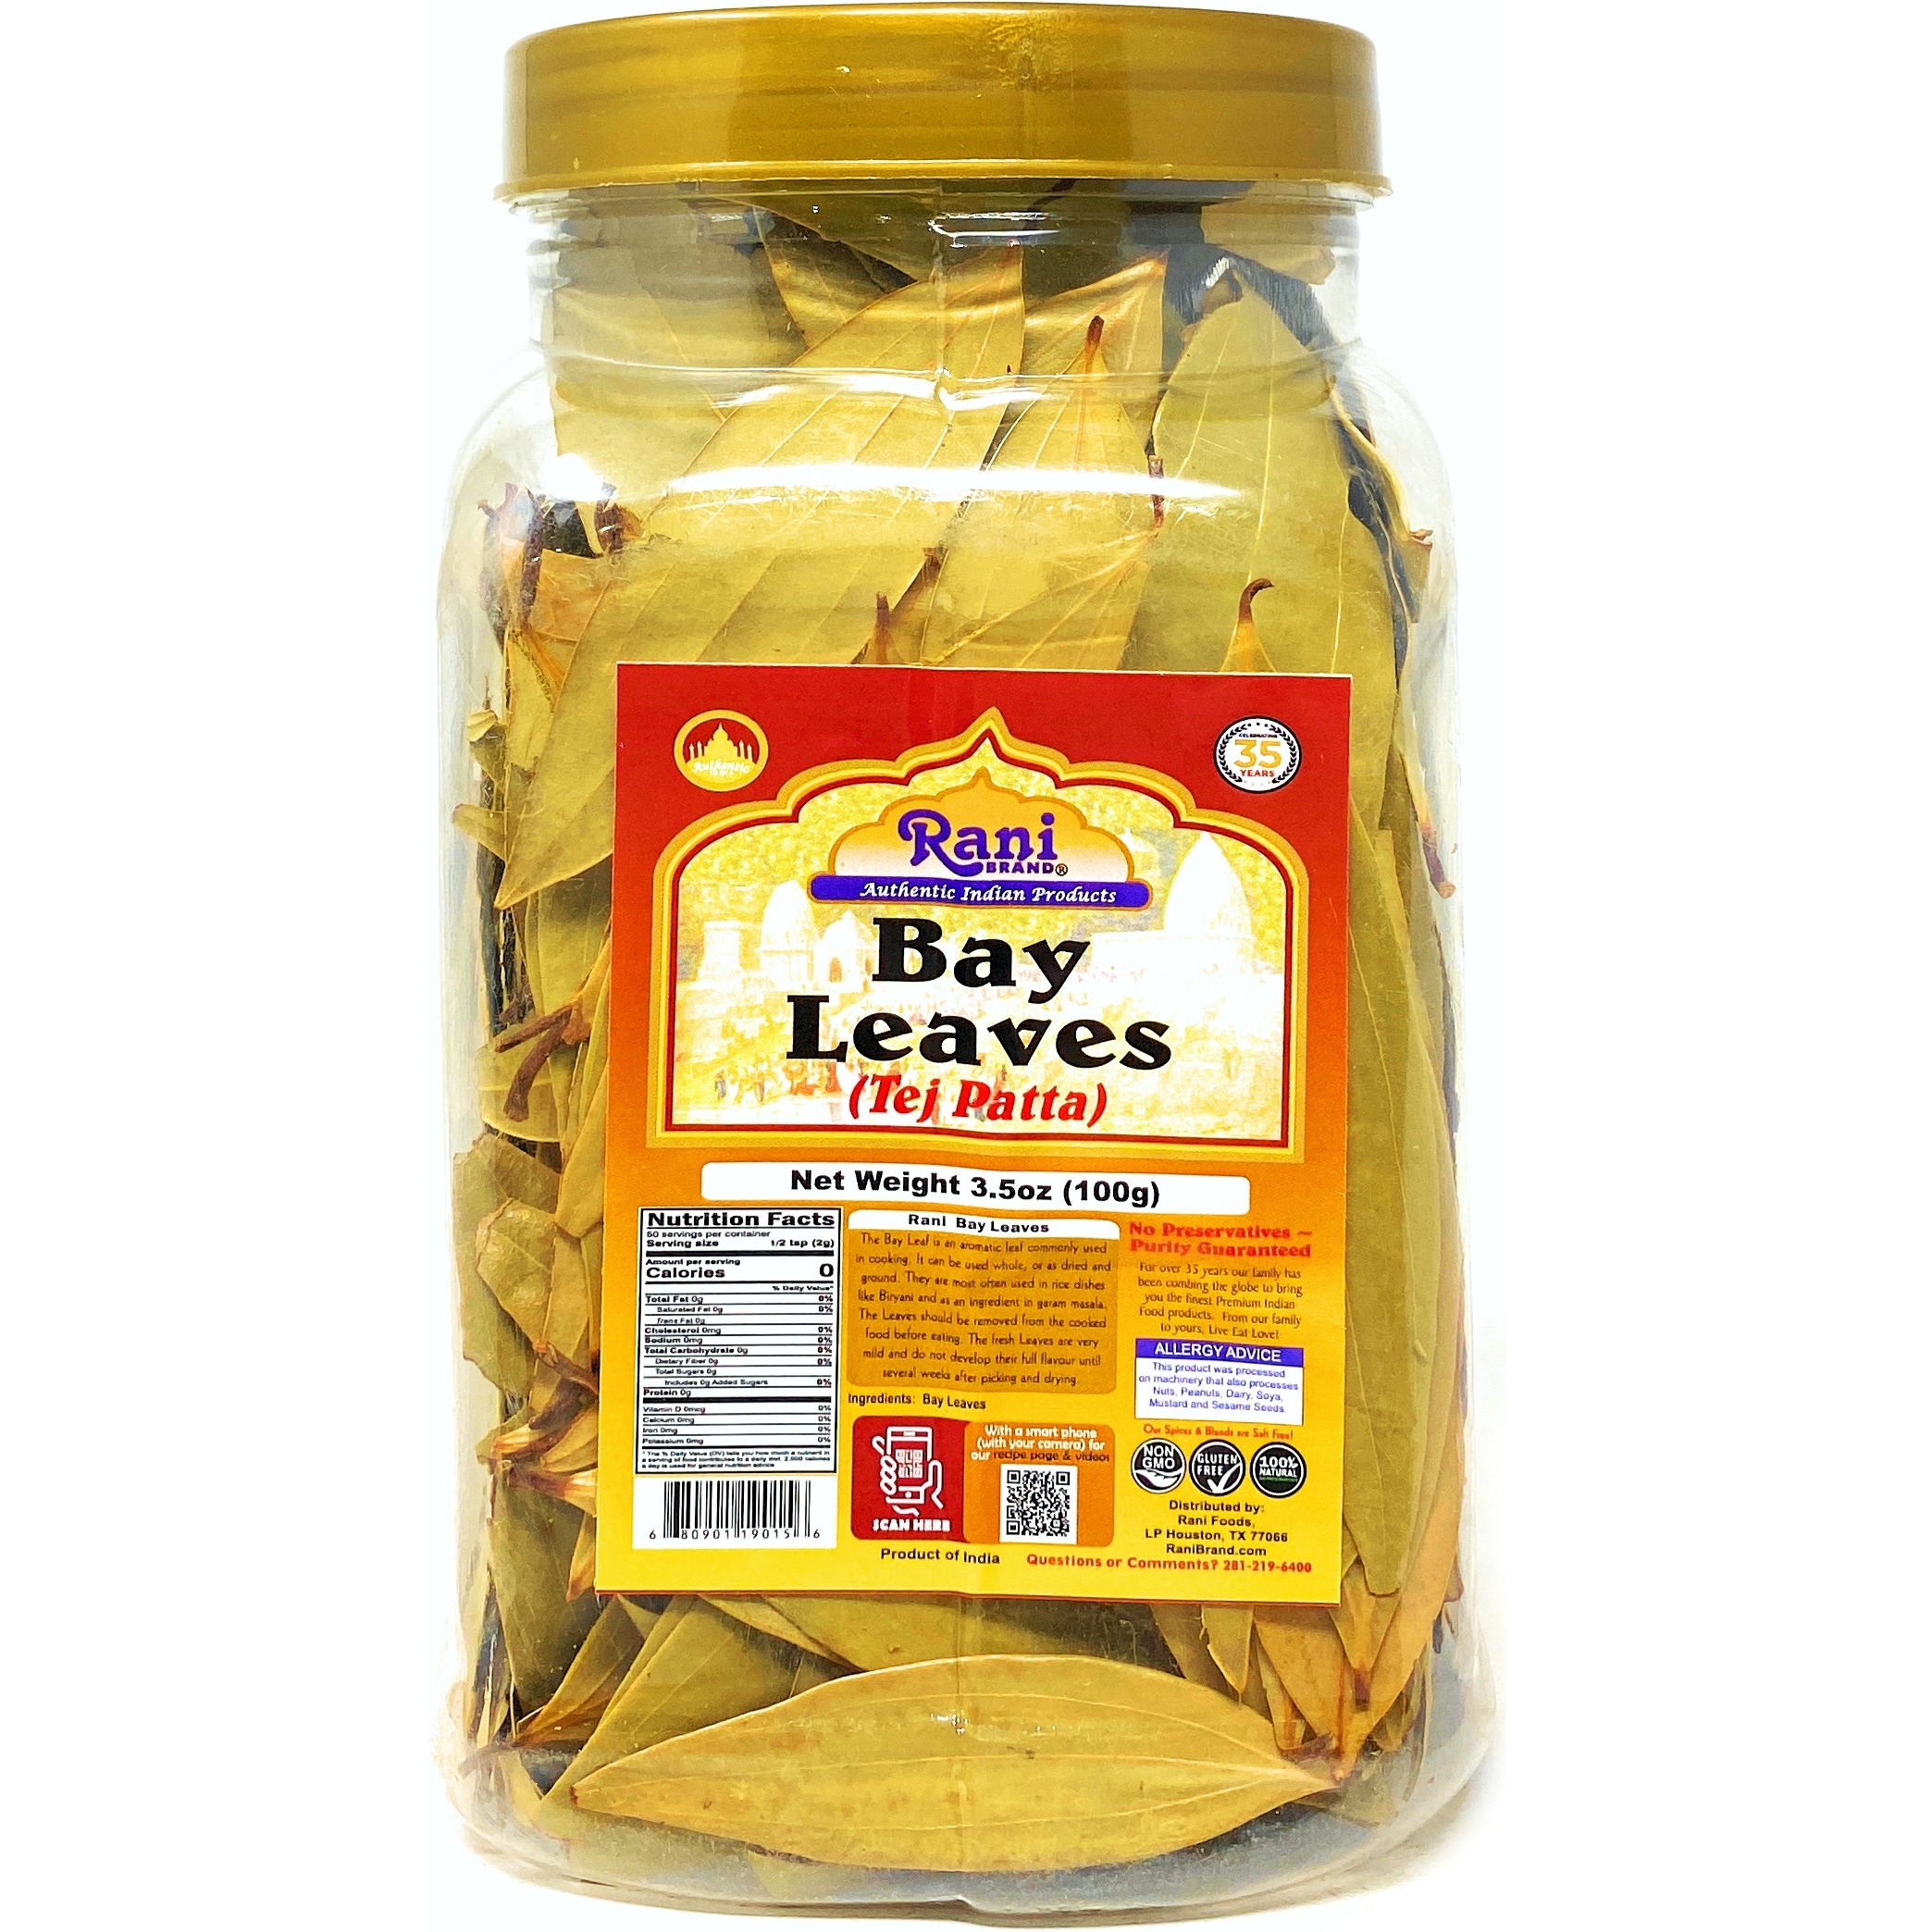 Rani Bay Leaf (Leaves) Whole Spice Hand Selected Extra Large 100g (3.5oz) PET Jar, All Natural ~ Gluten Friendly | NON-GMO | Vegan | Indian Origin (Tej Patta)